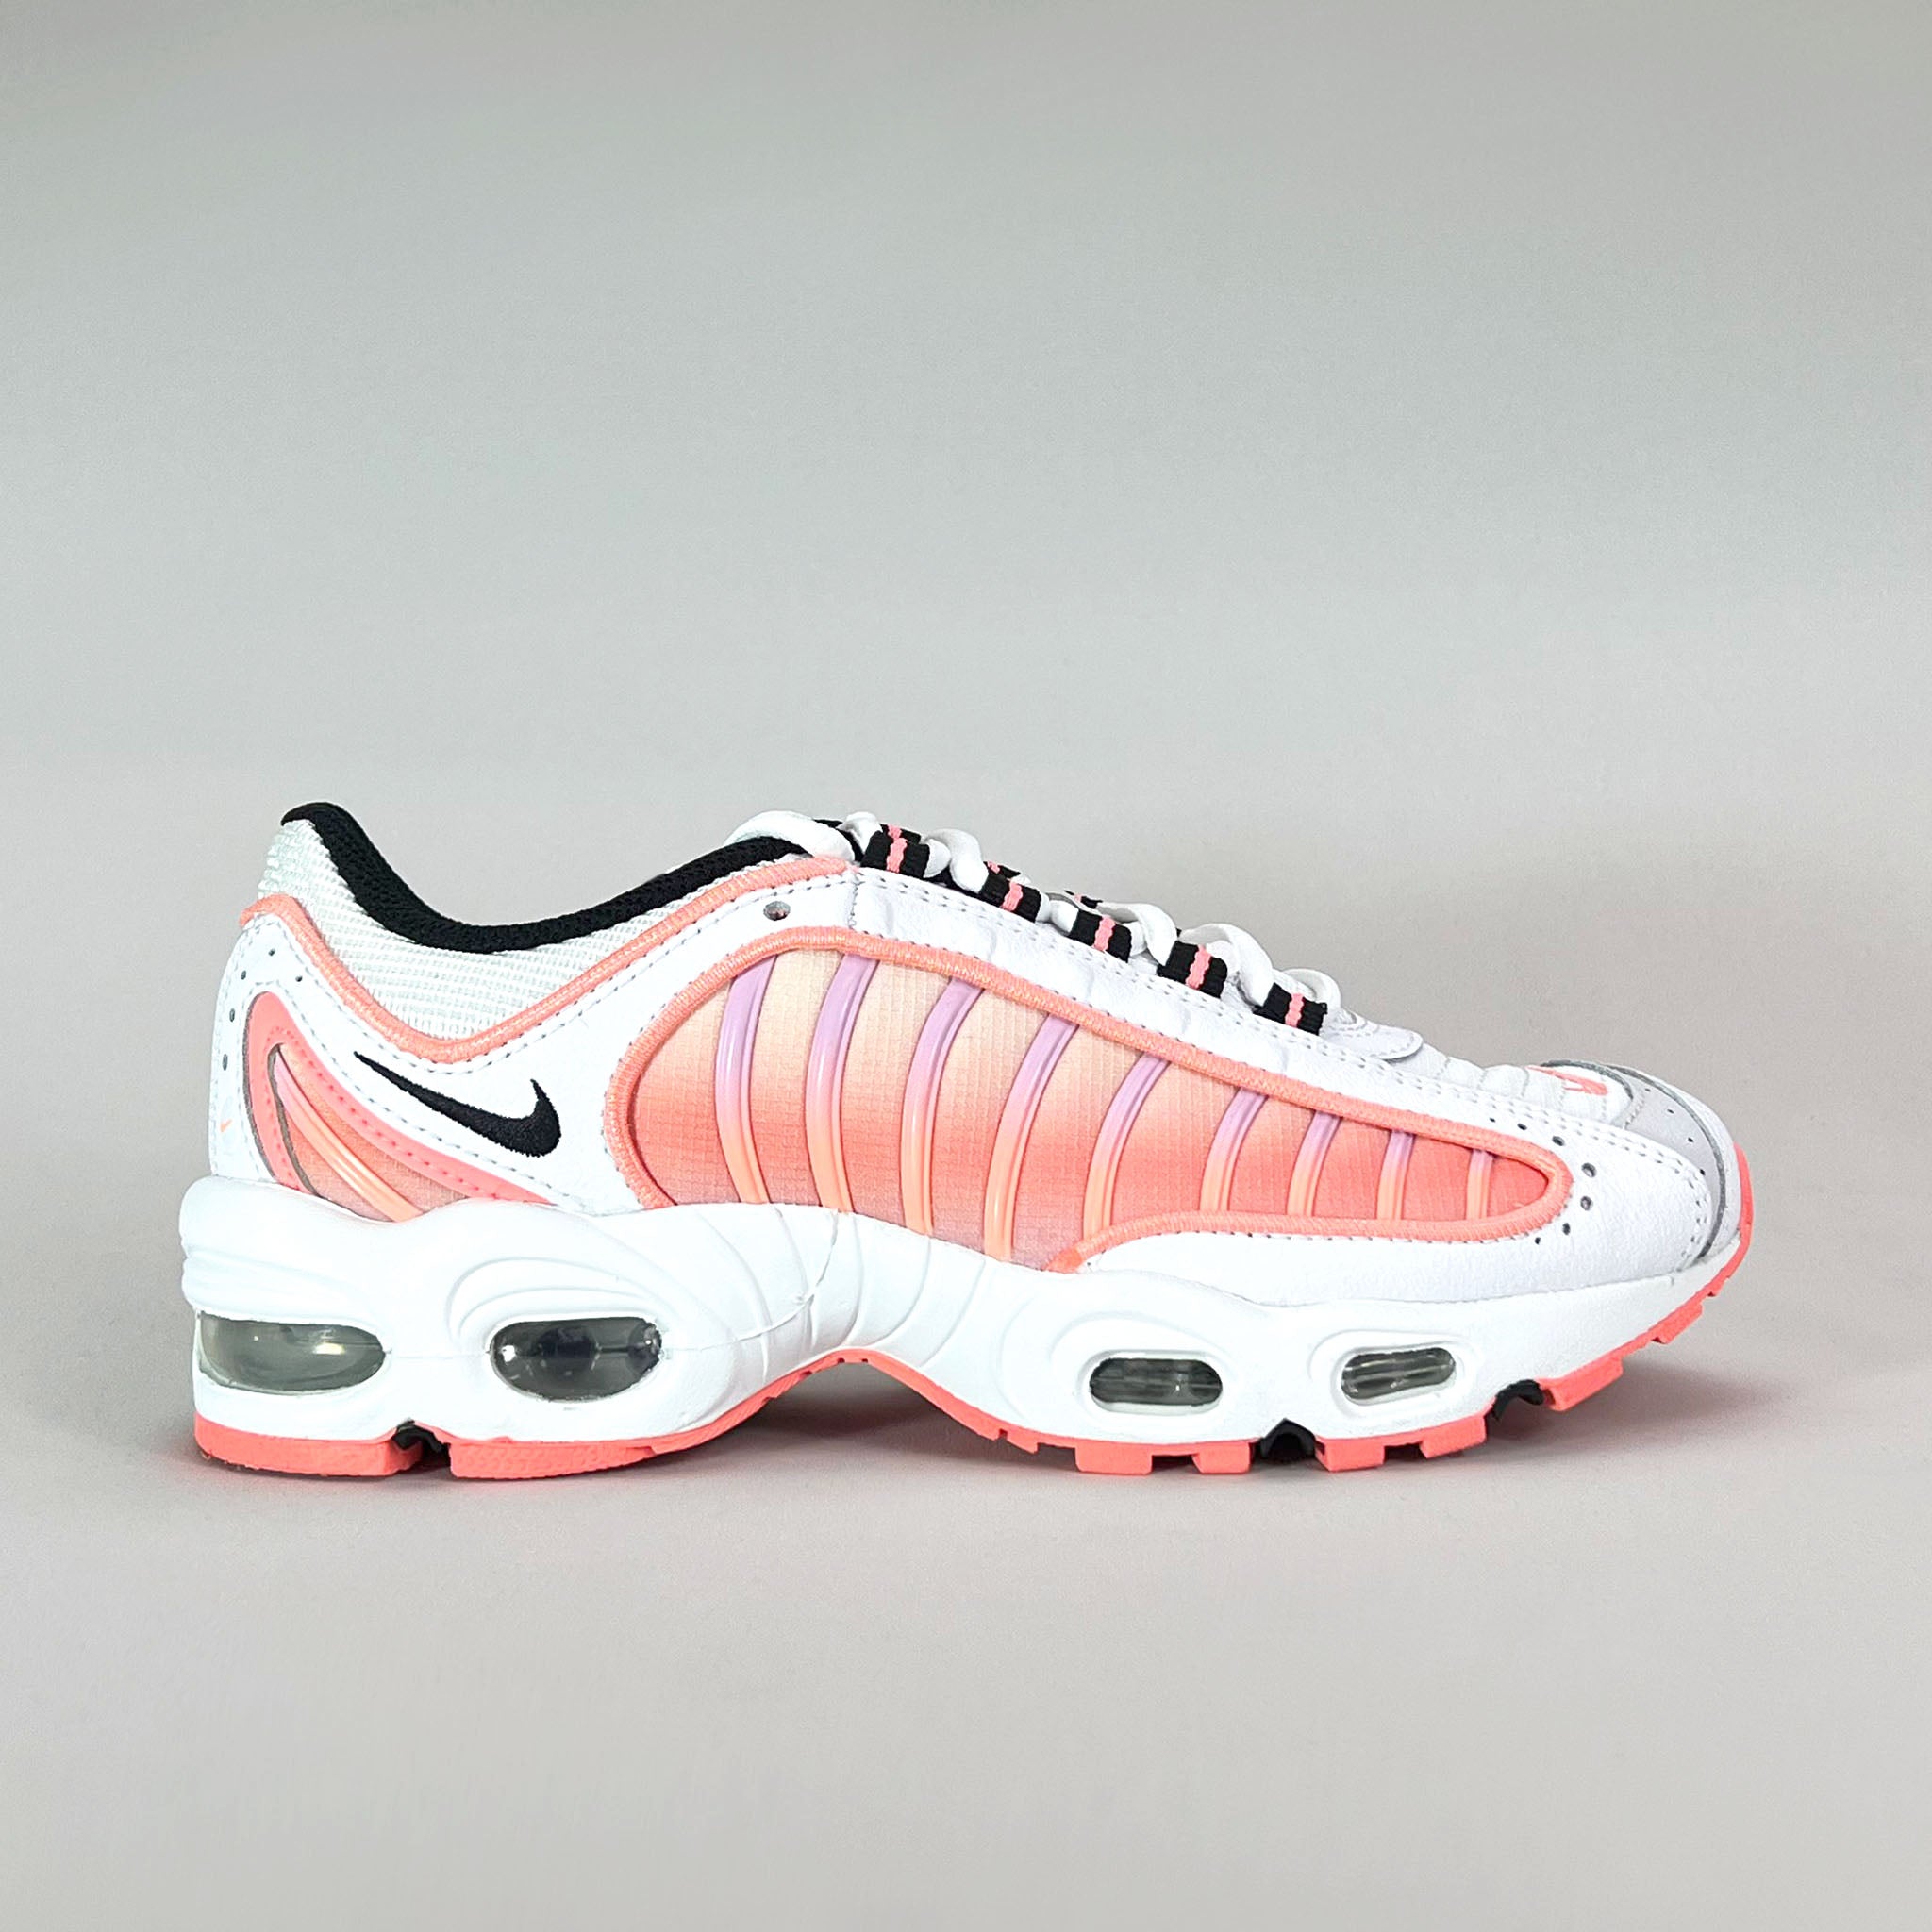 Nike Air Max Tailwind 4 Soft Pink (Women's)